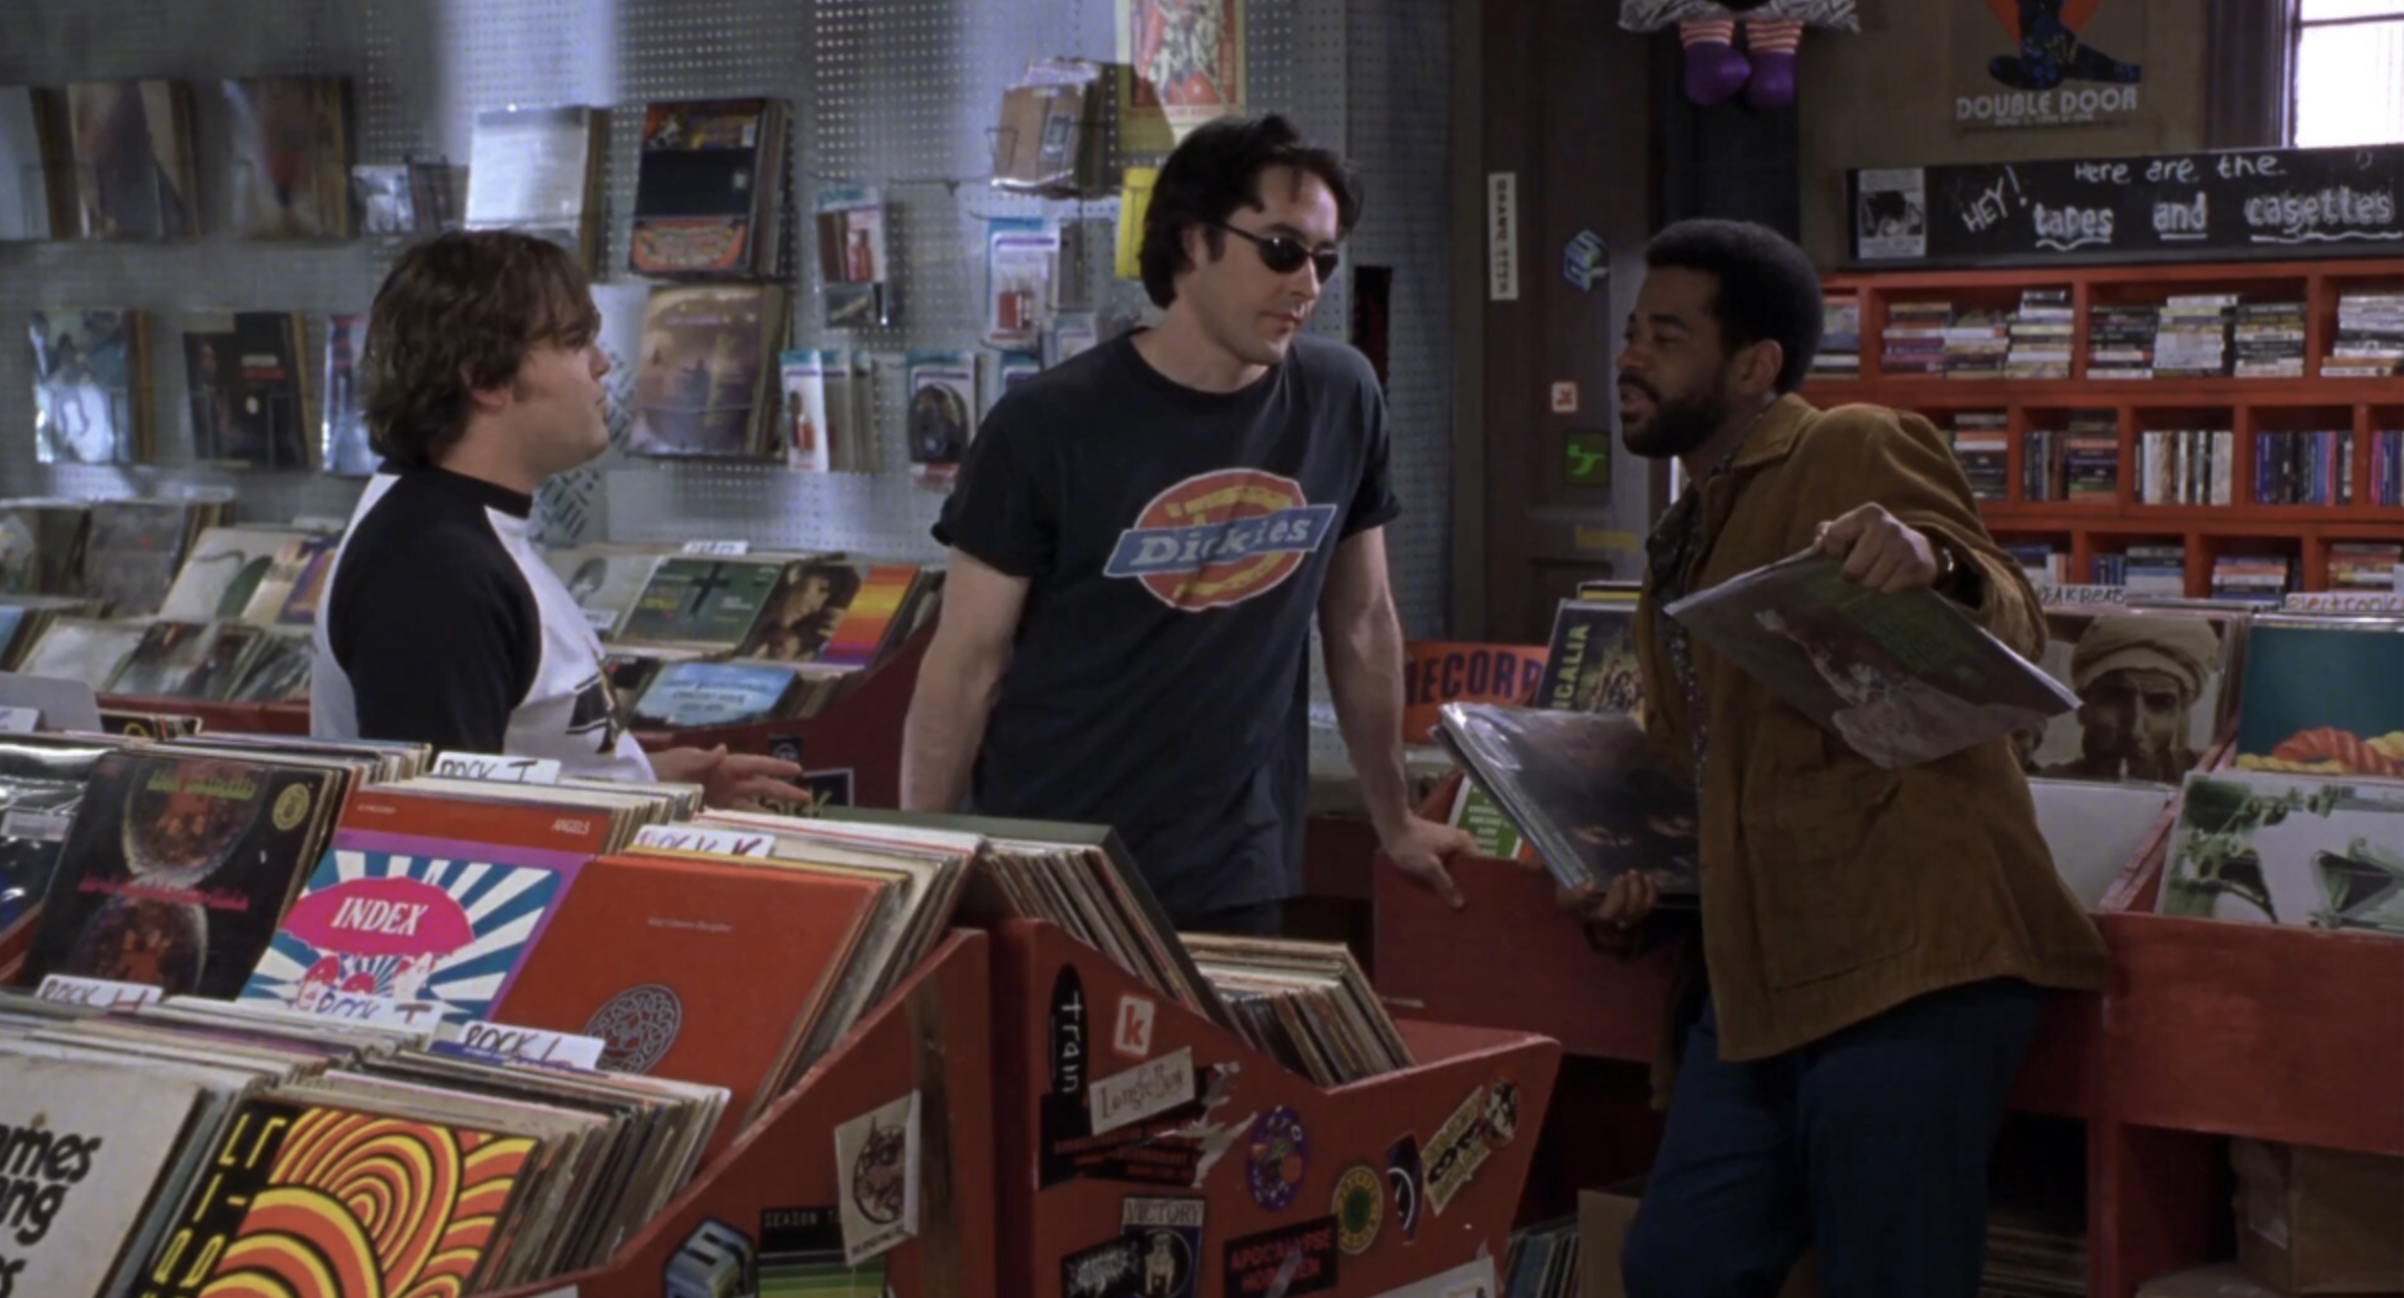 High Fidelity 1995. Empire 2000. Point of know Return(m/m). Chungking Express 1994 poster. Working dick